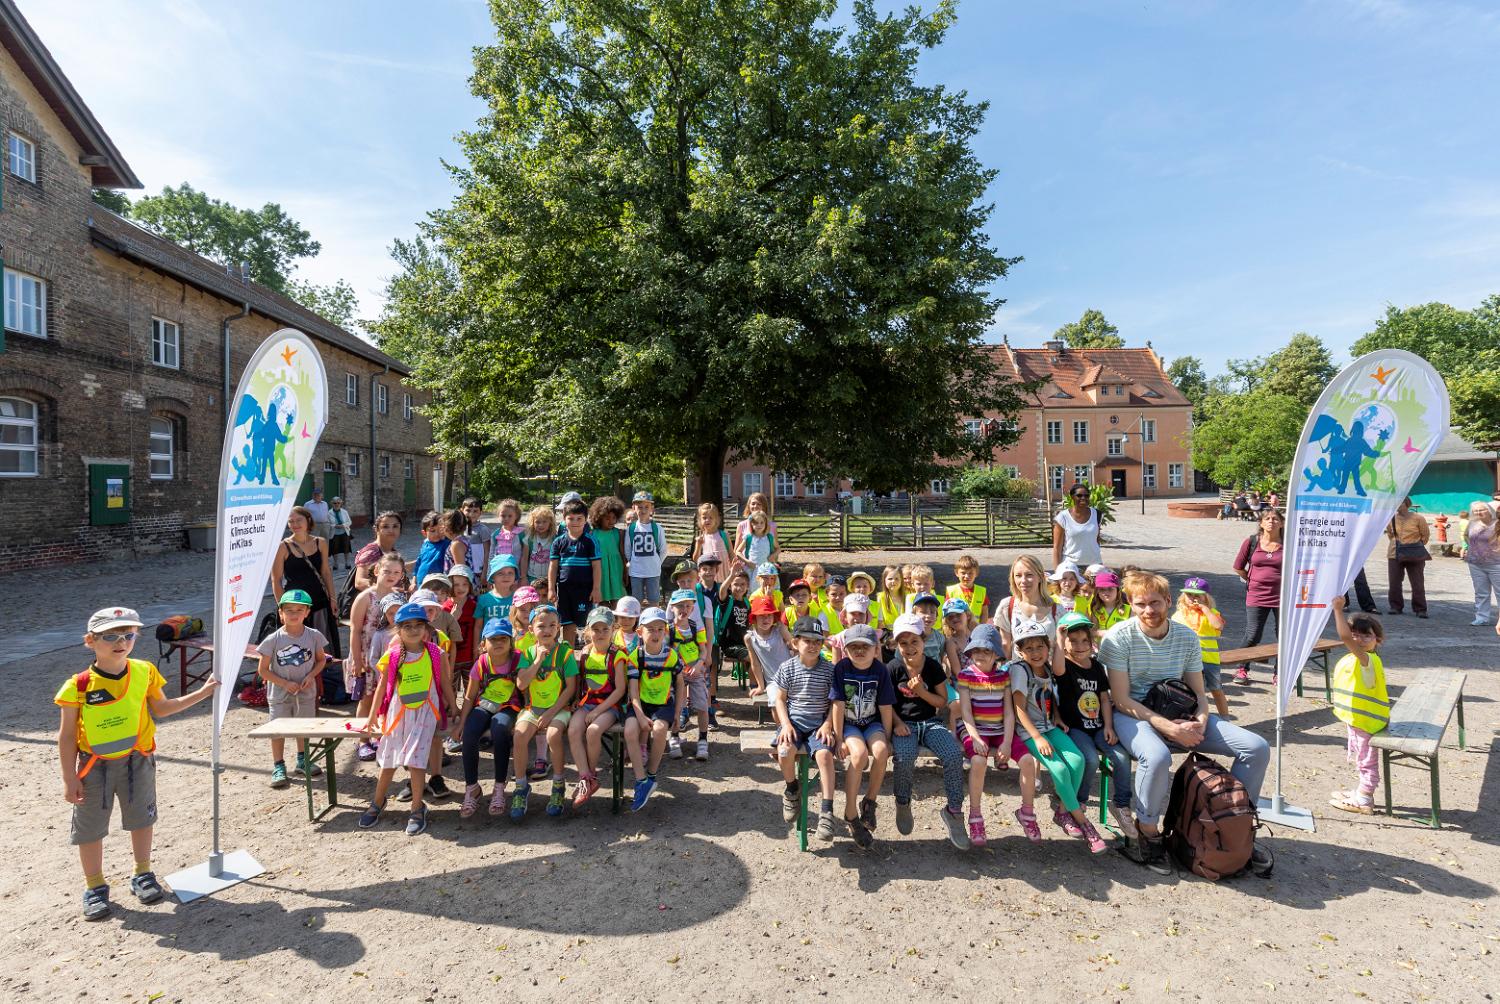 Annual event 2018 of the project "Energy and Climate Protection in kindergartens"